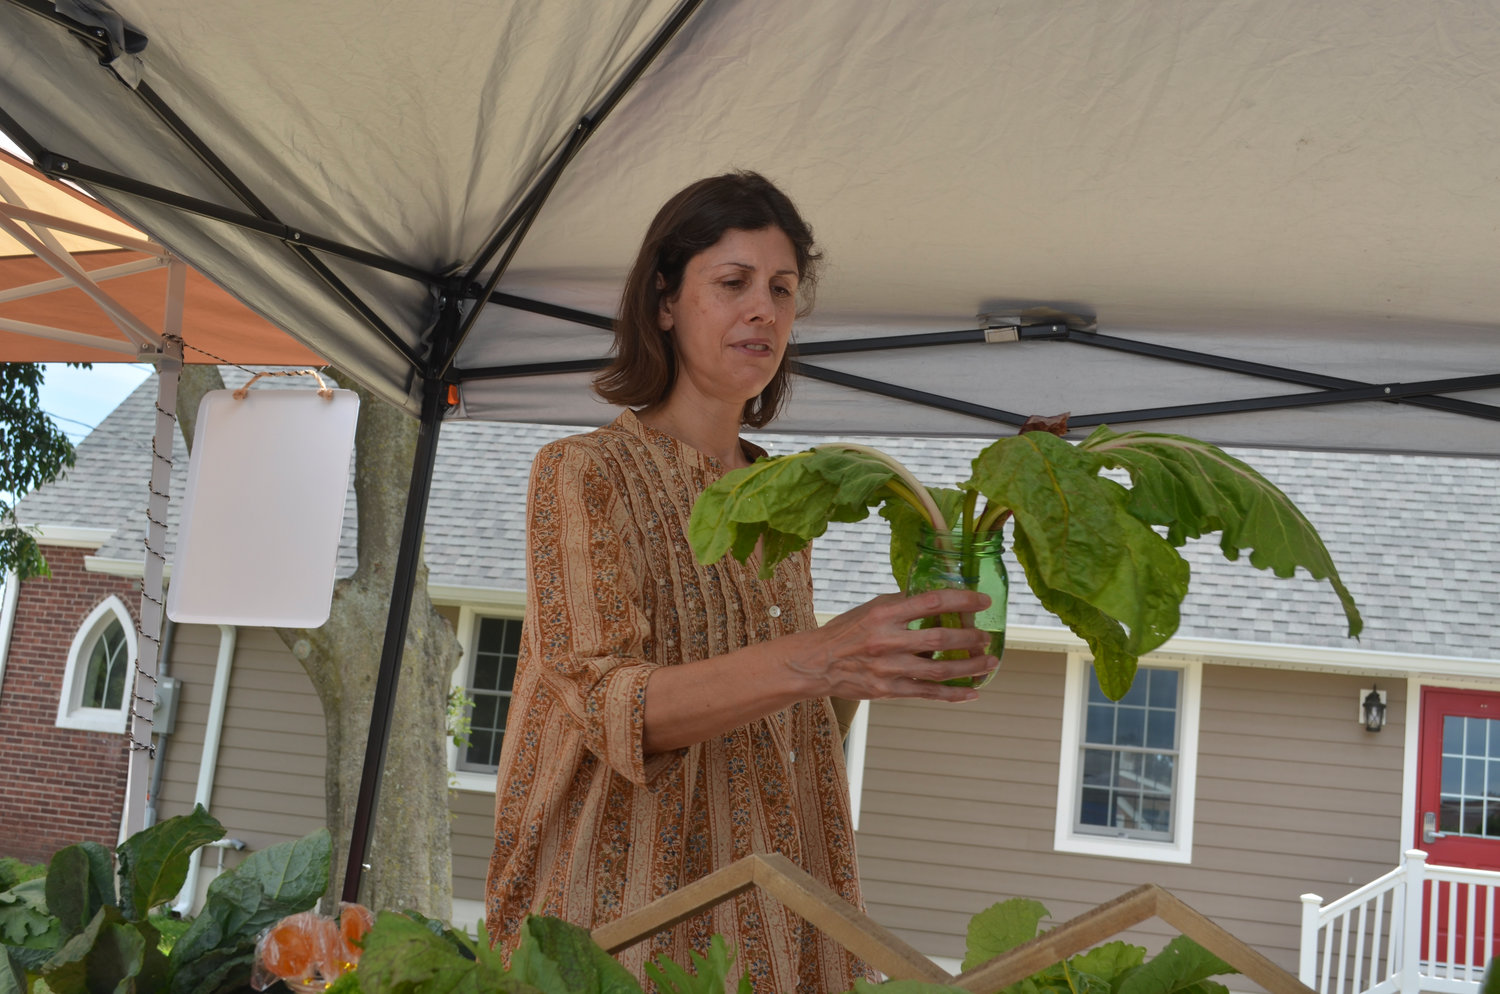 Rebecca Tory from Bellmore checked out a vegetable for sale.